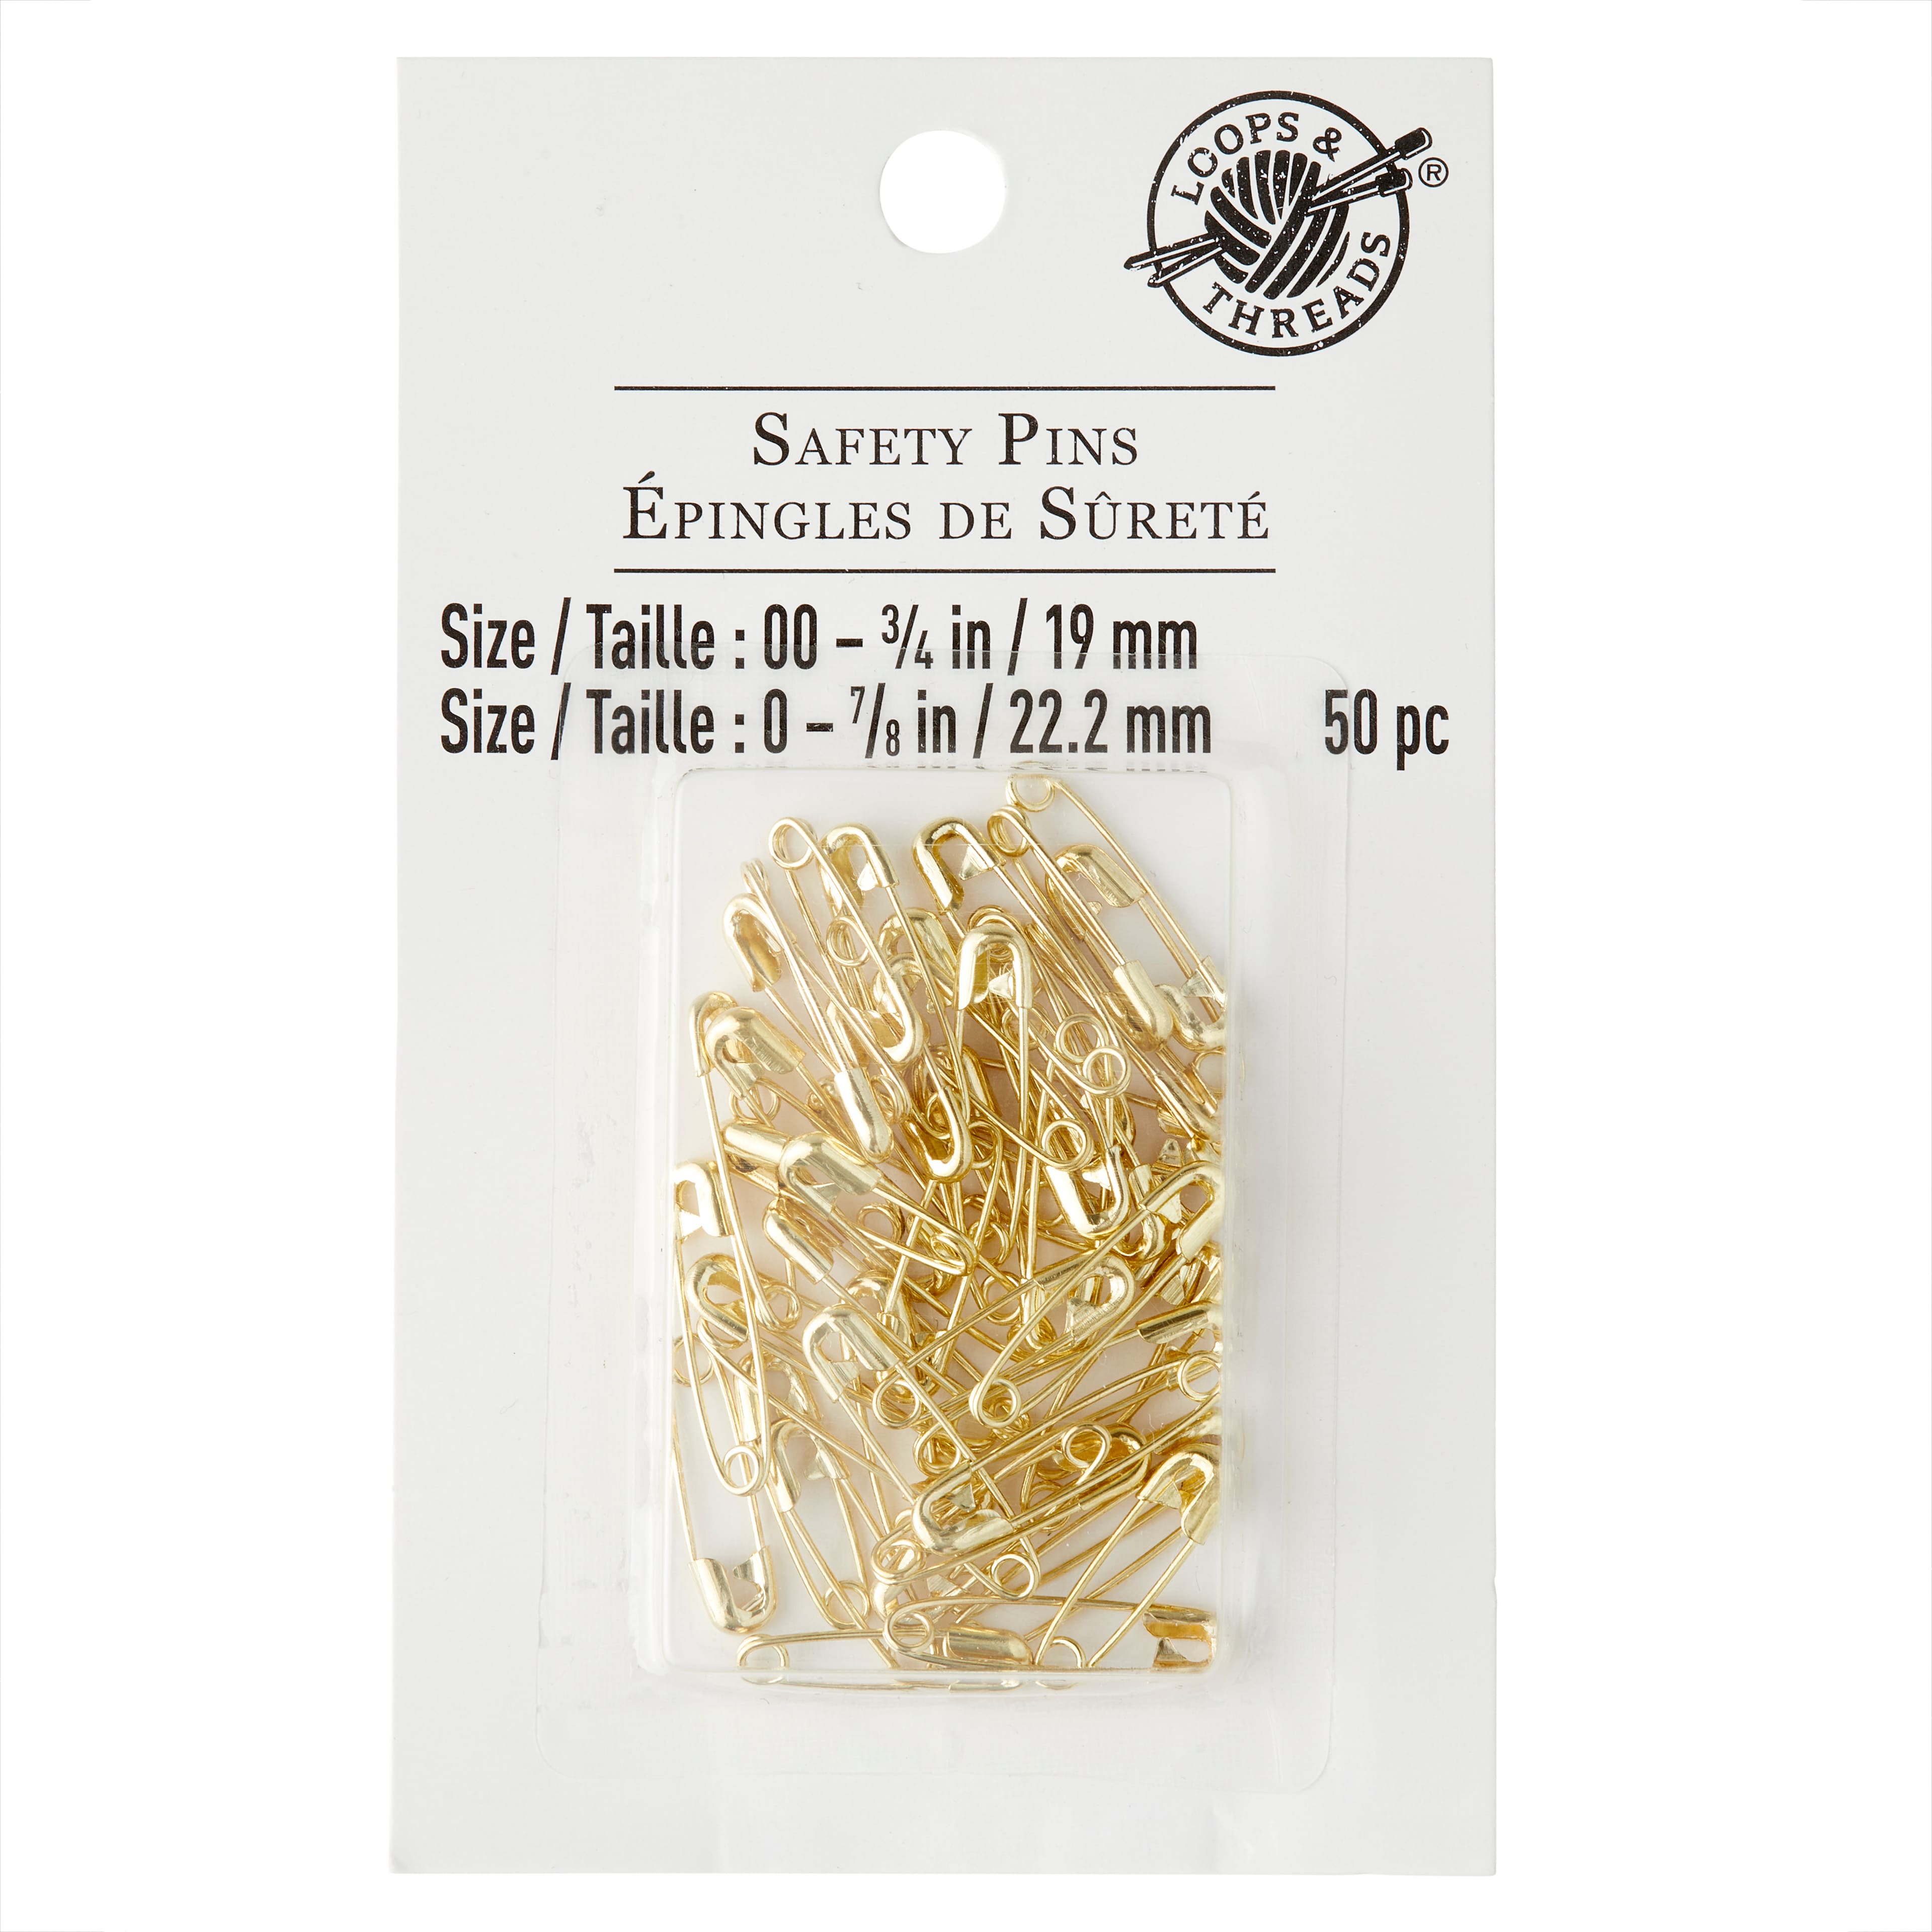 Loops & Threads 3/4 & 7/8 Safety Pins - Each